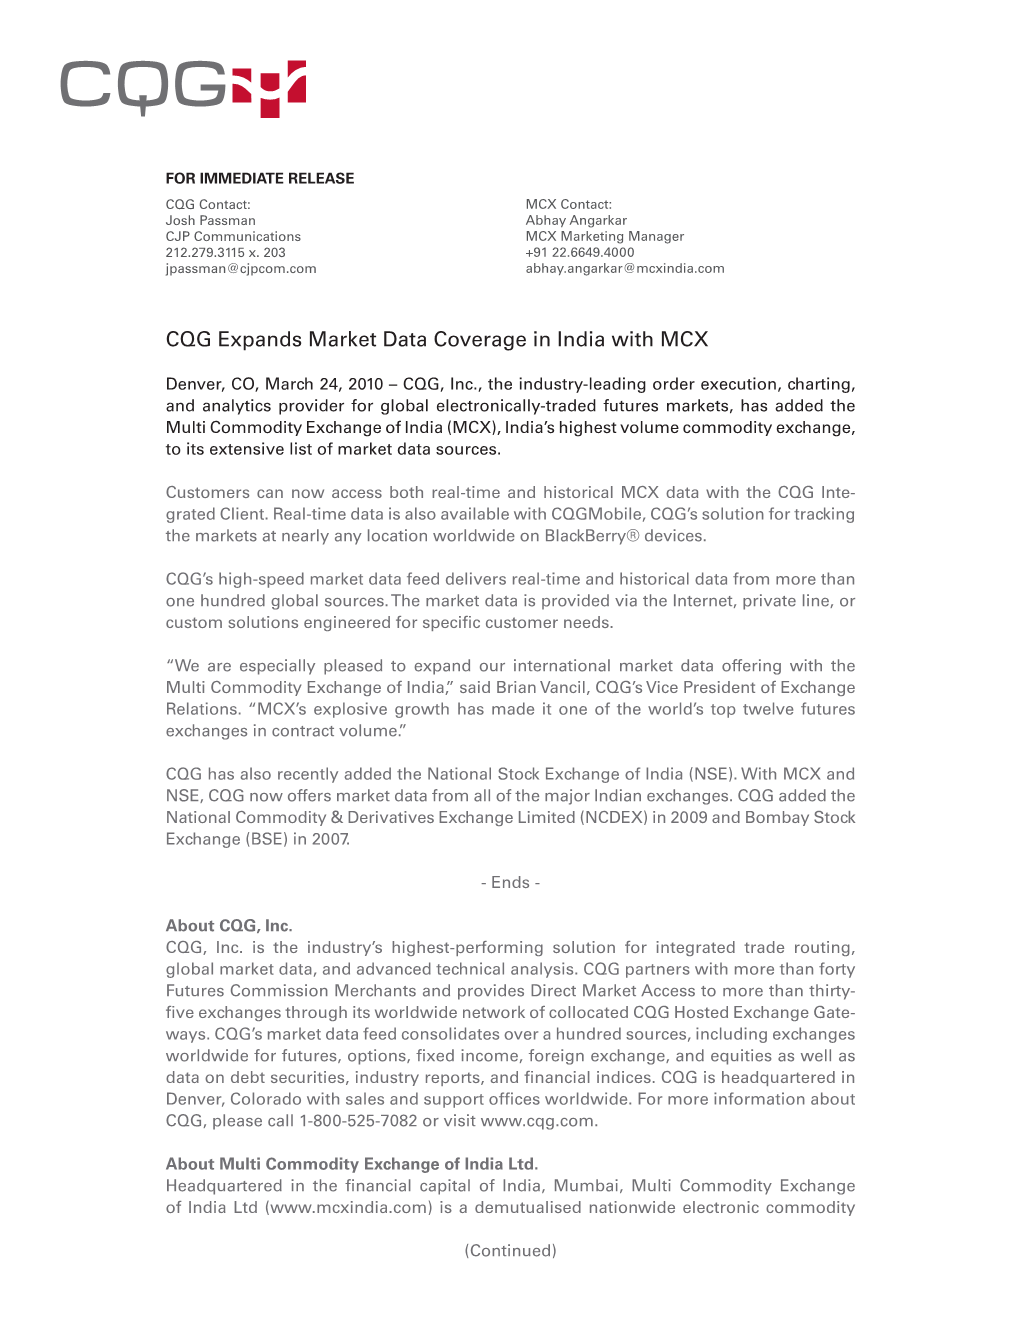 CQG Expands Market Data Coverage in India with MCX